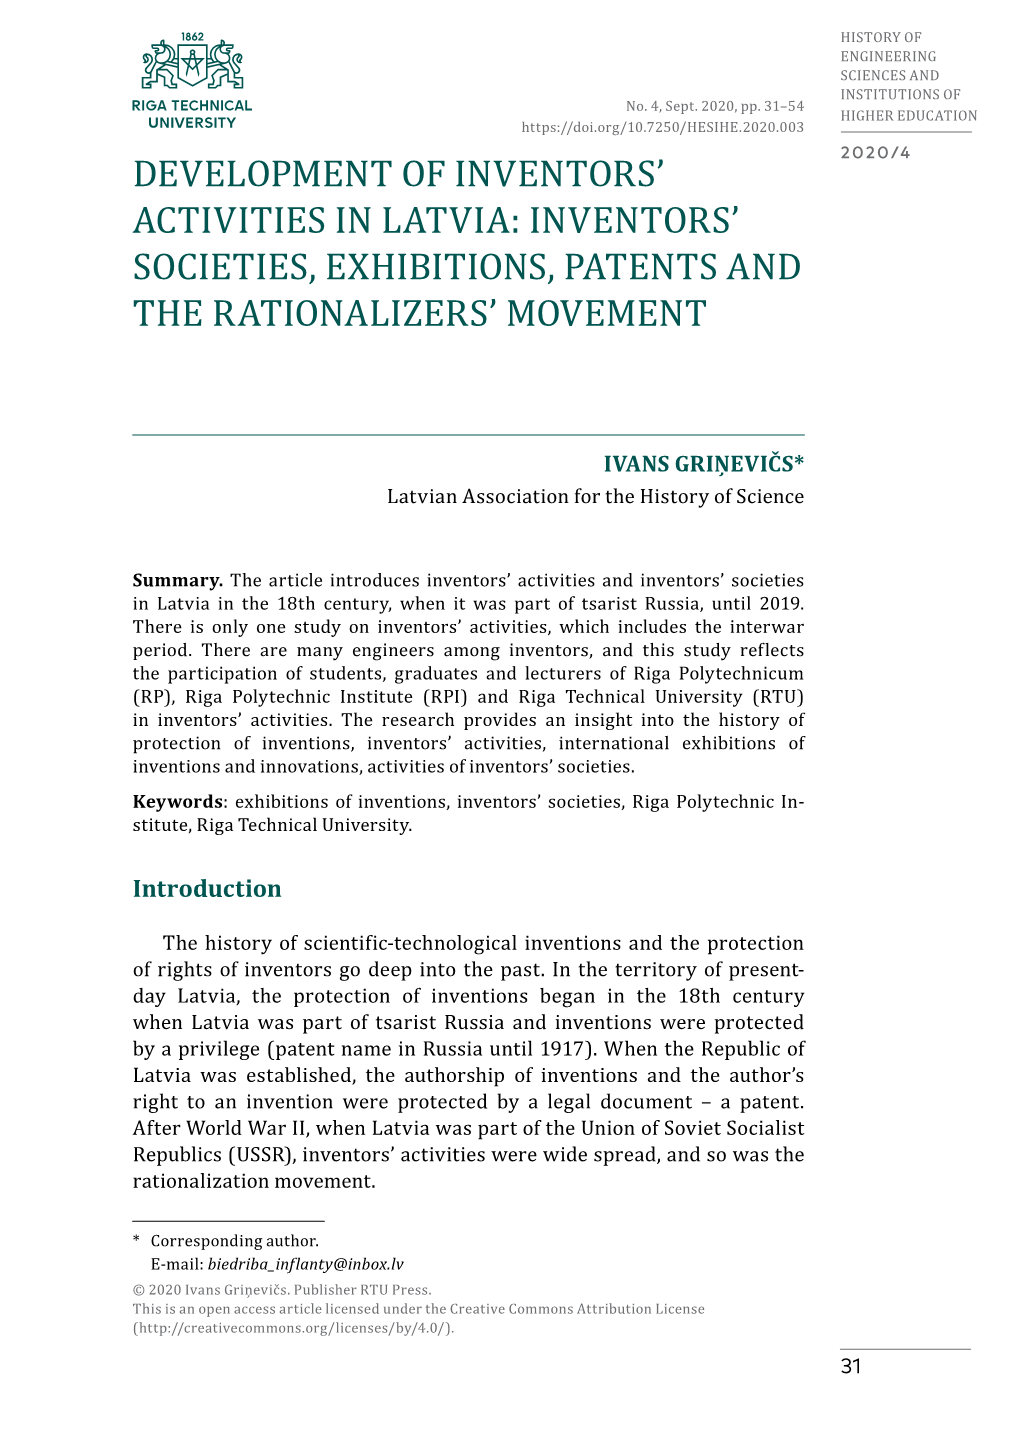 Inventors' Societies, Exhibitions, Patents and the Rationalizers